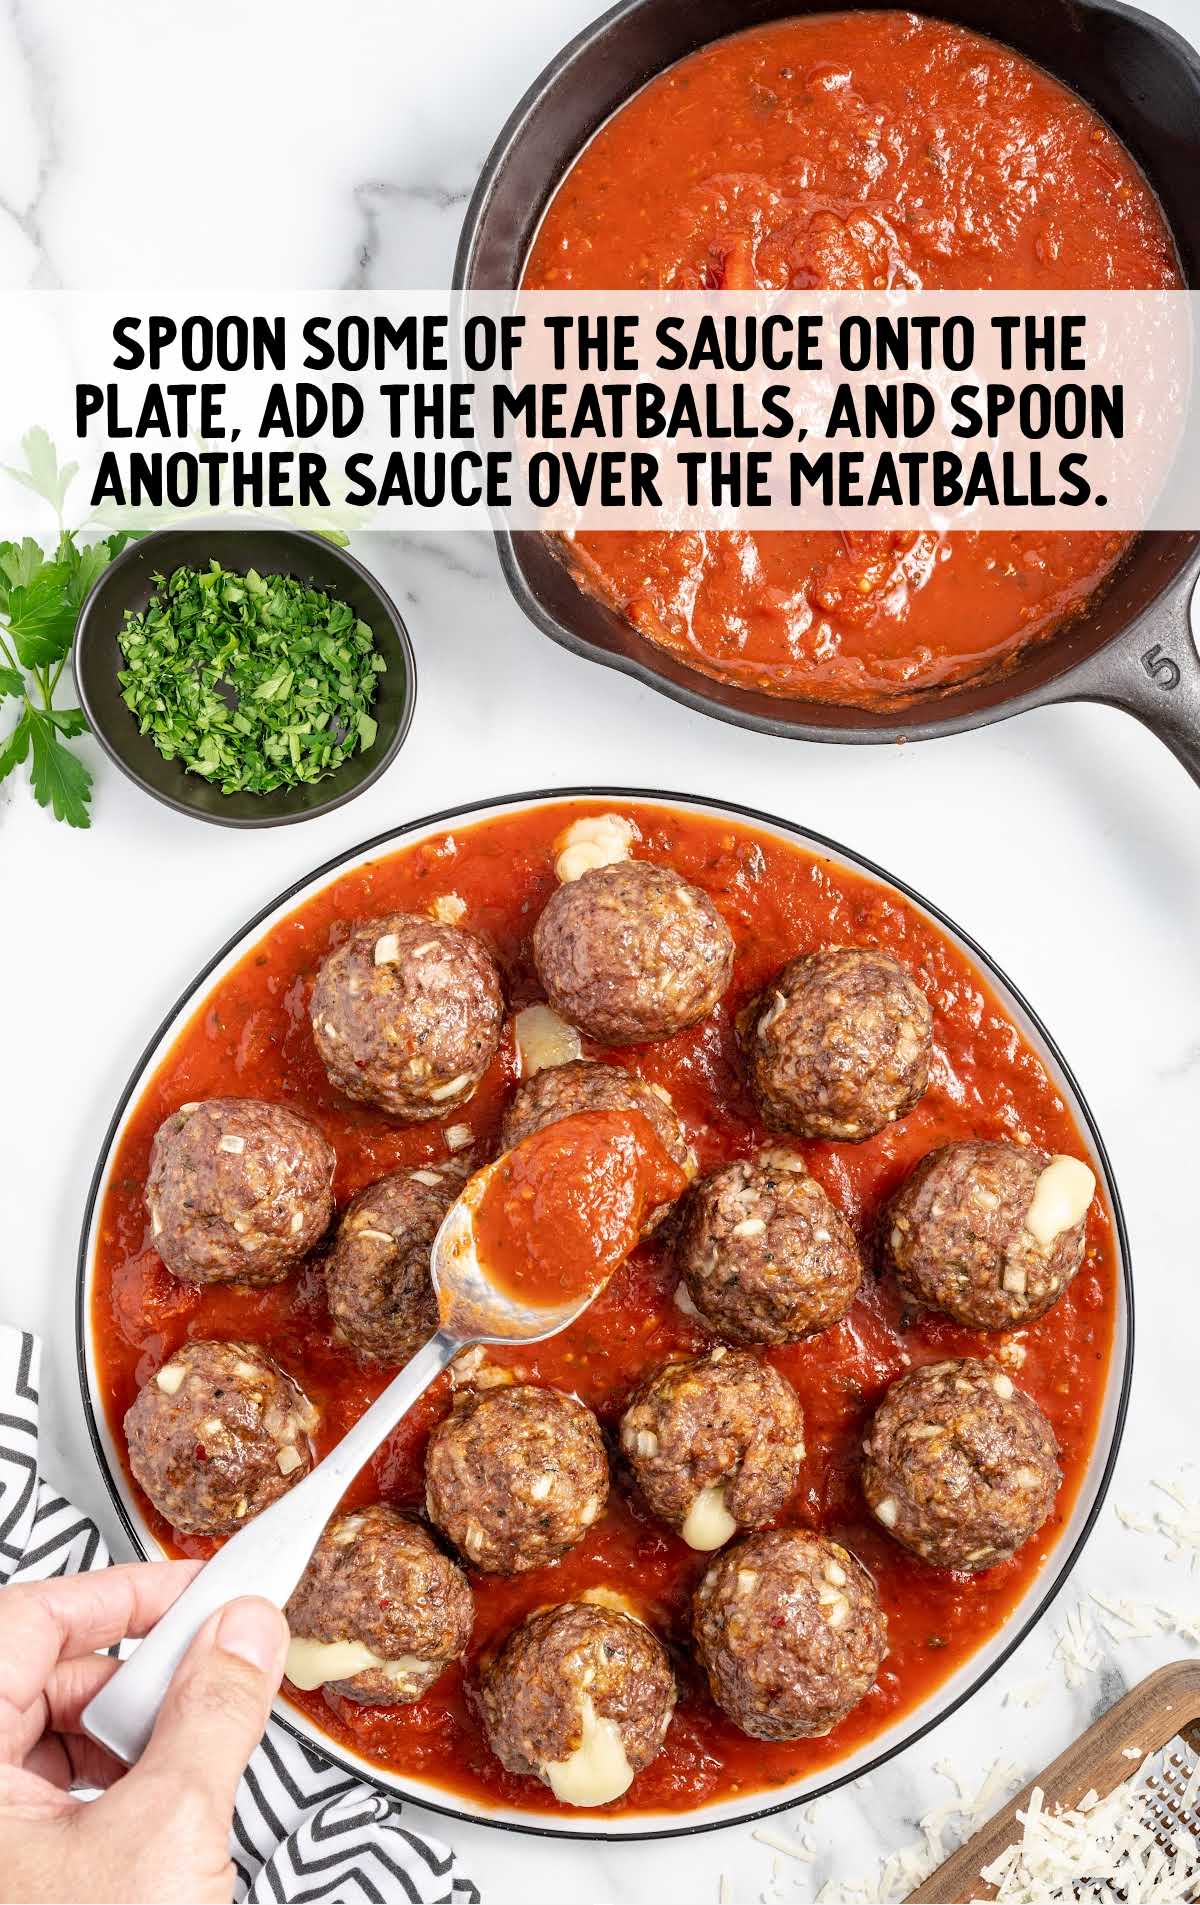 sauce spooned onto the plate and add meatballs